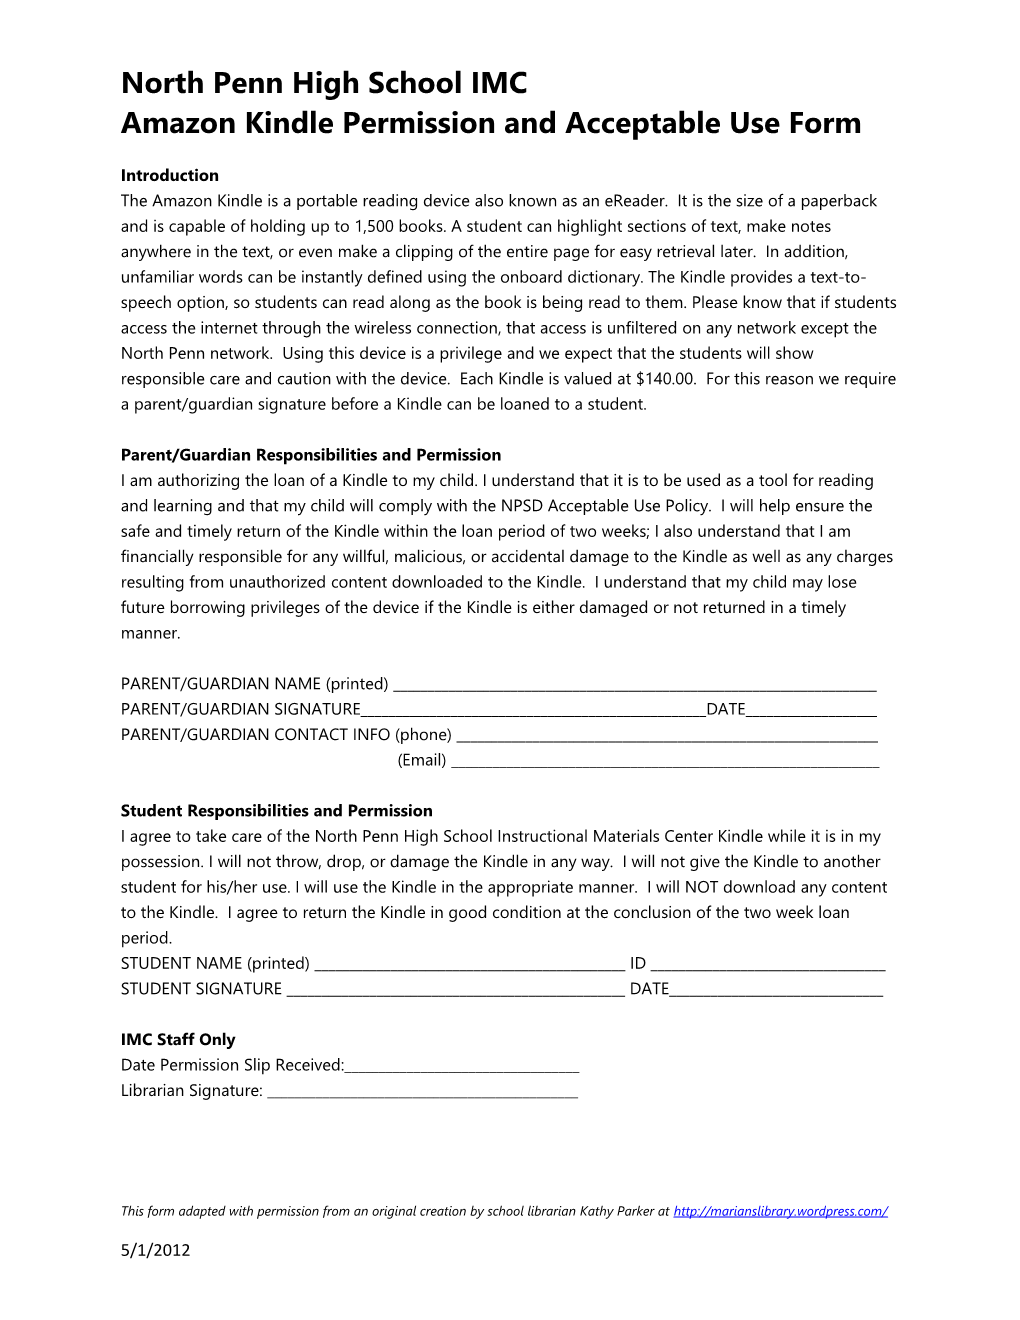 Amazon Kindle Permission and Acceptable Use Form